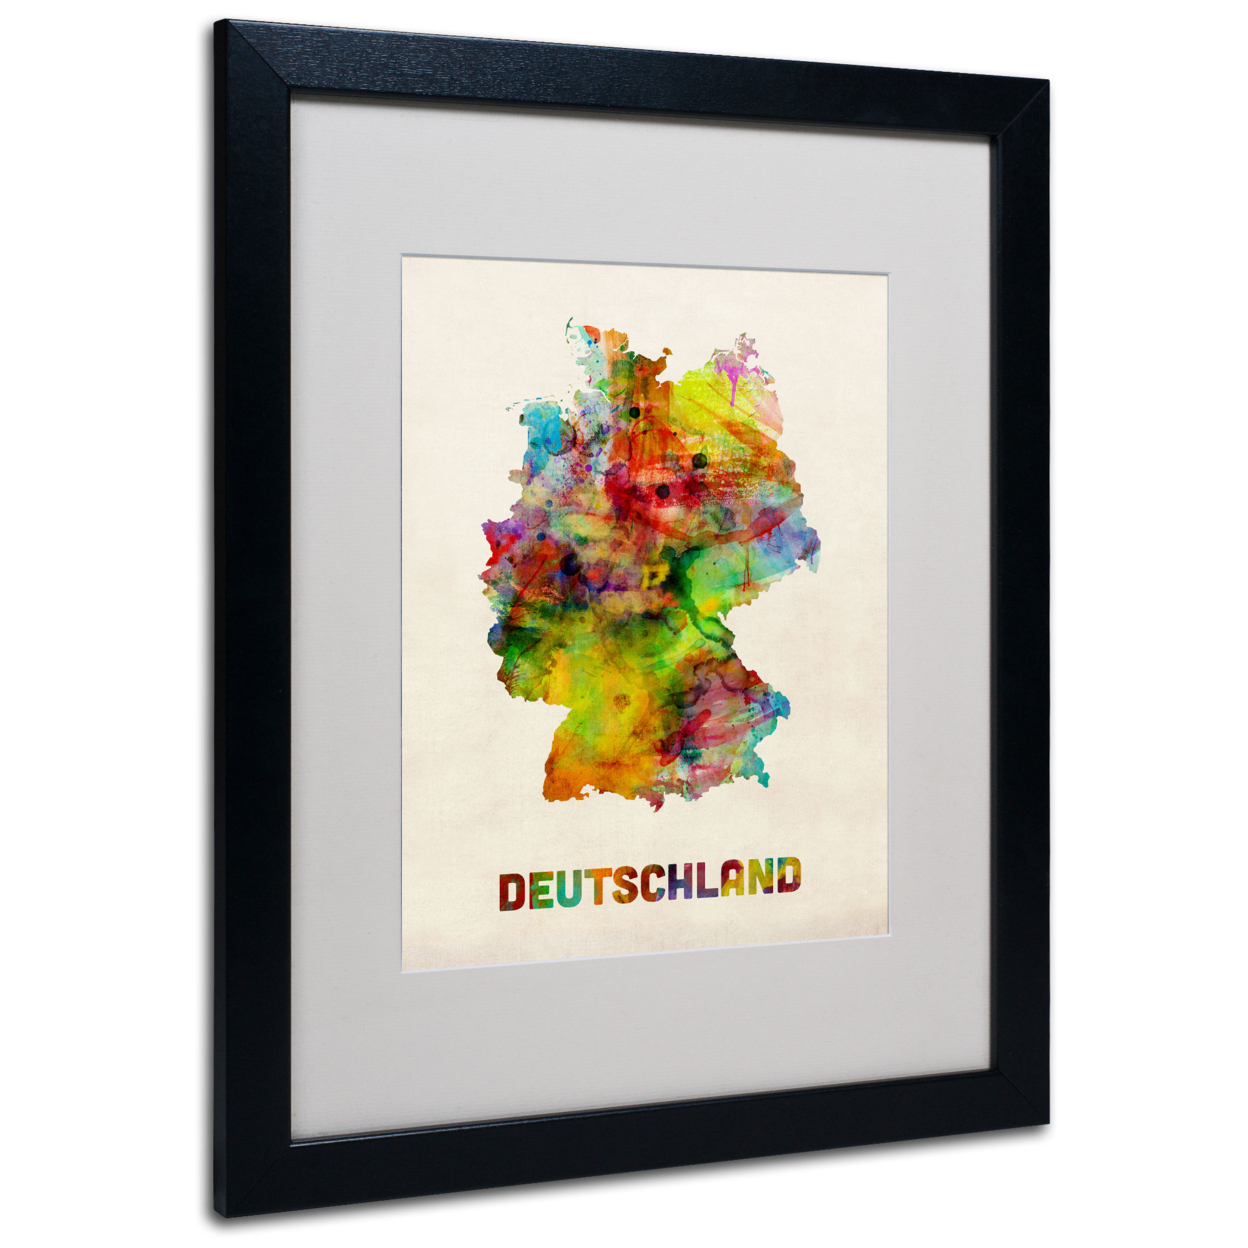 Michael Tompsett 'Germany Watercolor Map' Black Wooden Framed Art 18 X 22 Inches